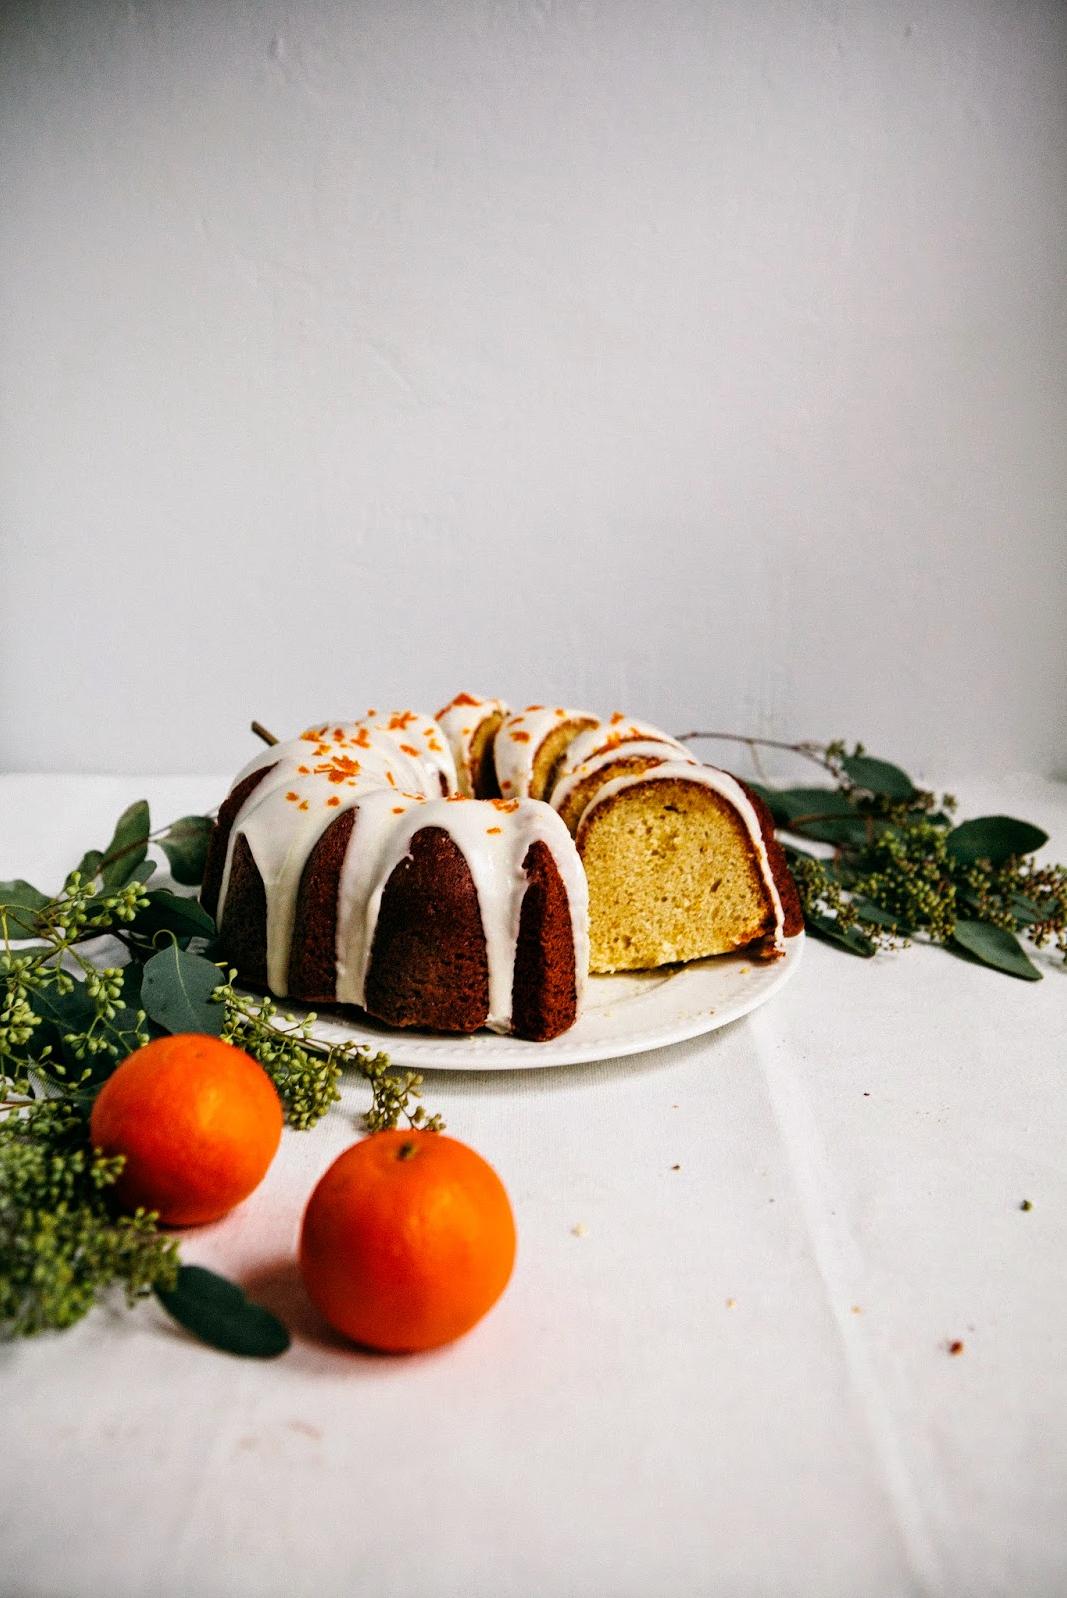  This pound cake is unbelievably delicious thanks to the perfect combination of sour cream and tangerine flavors.